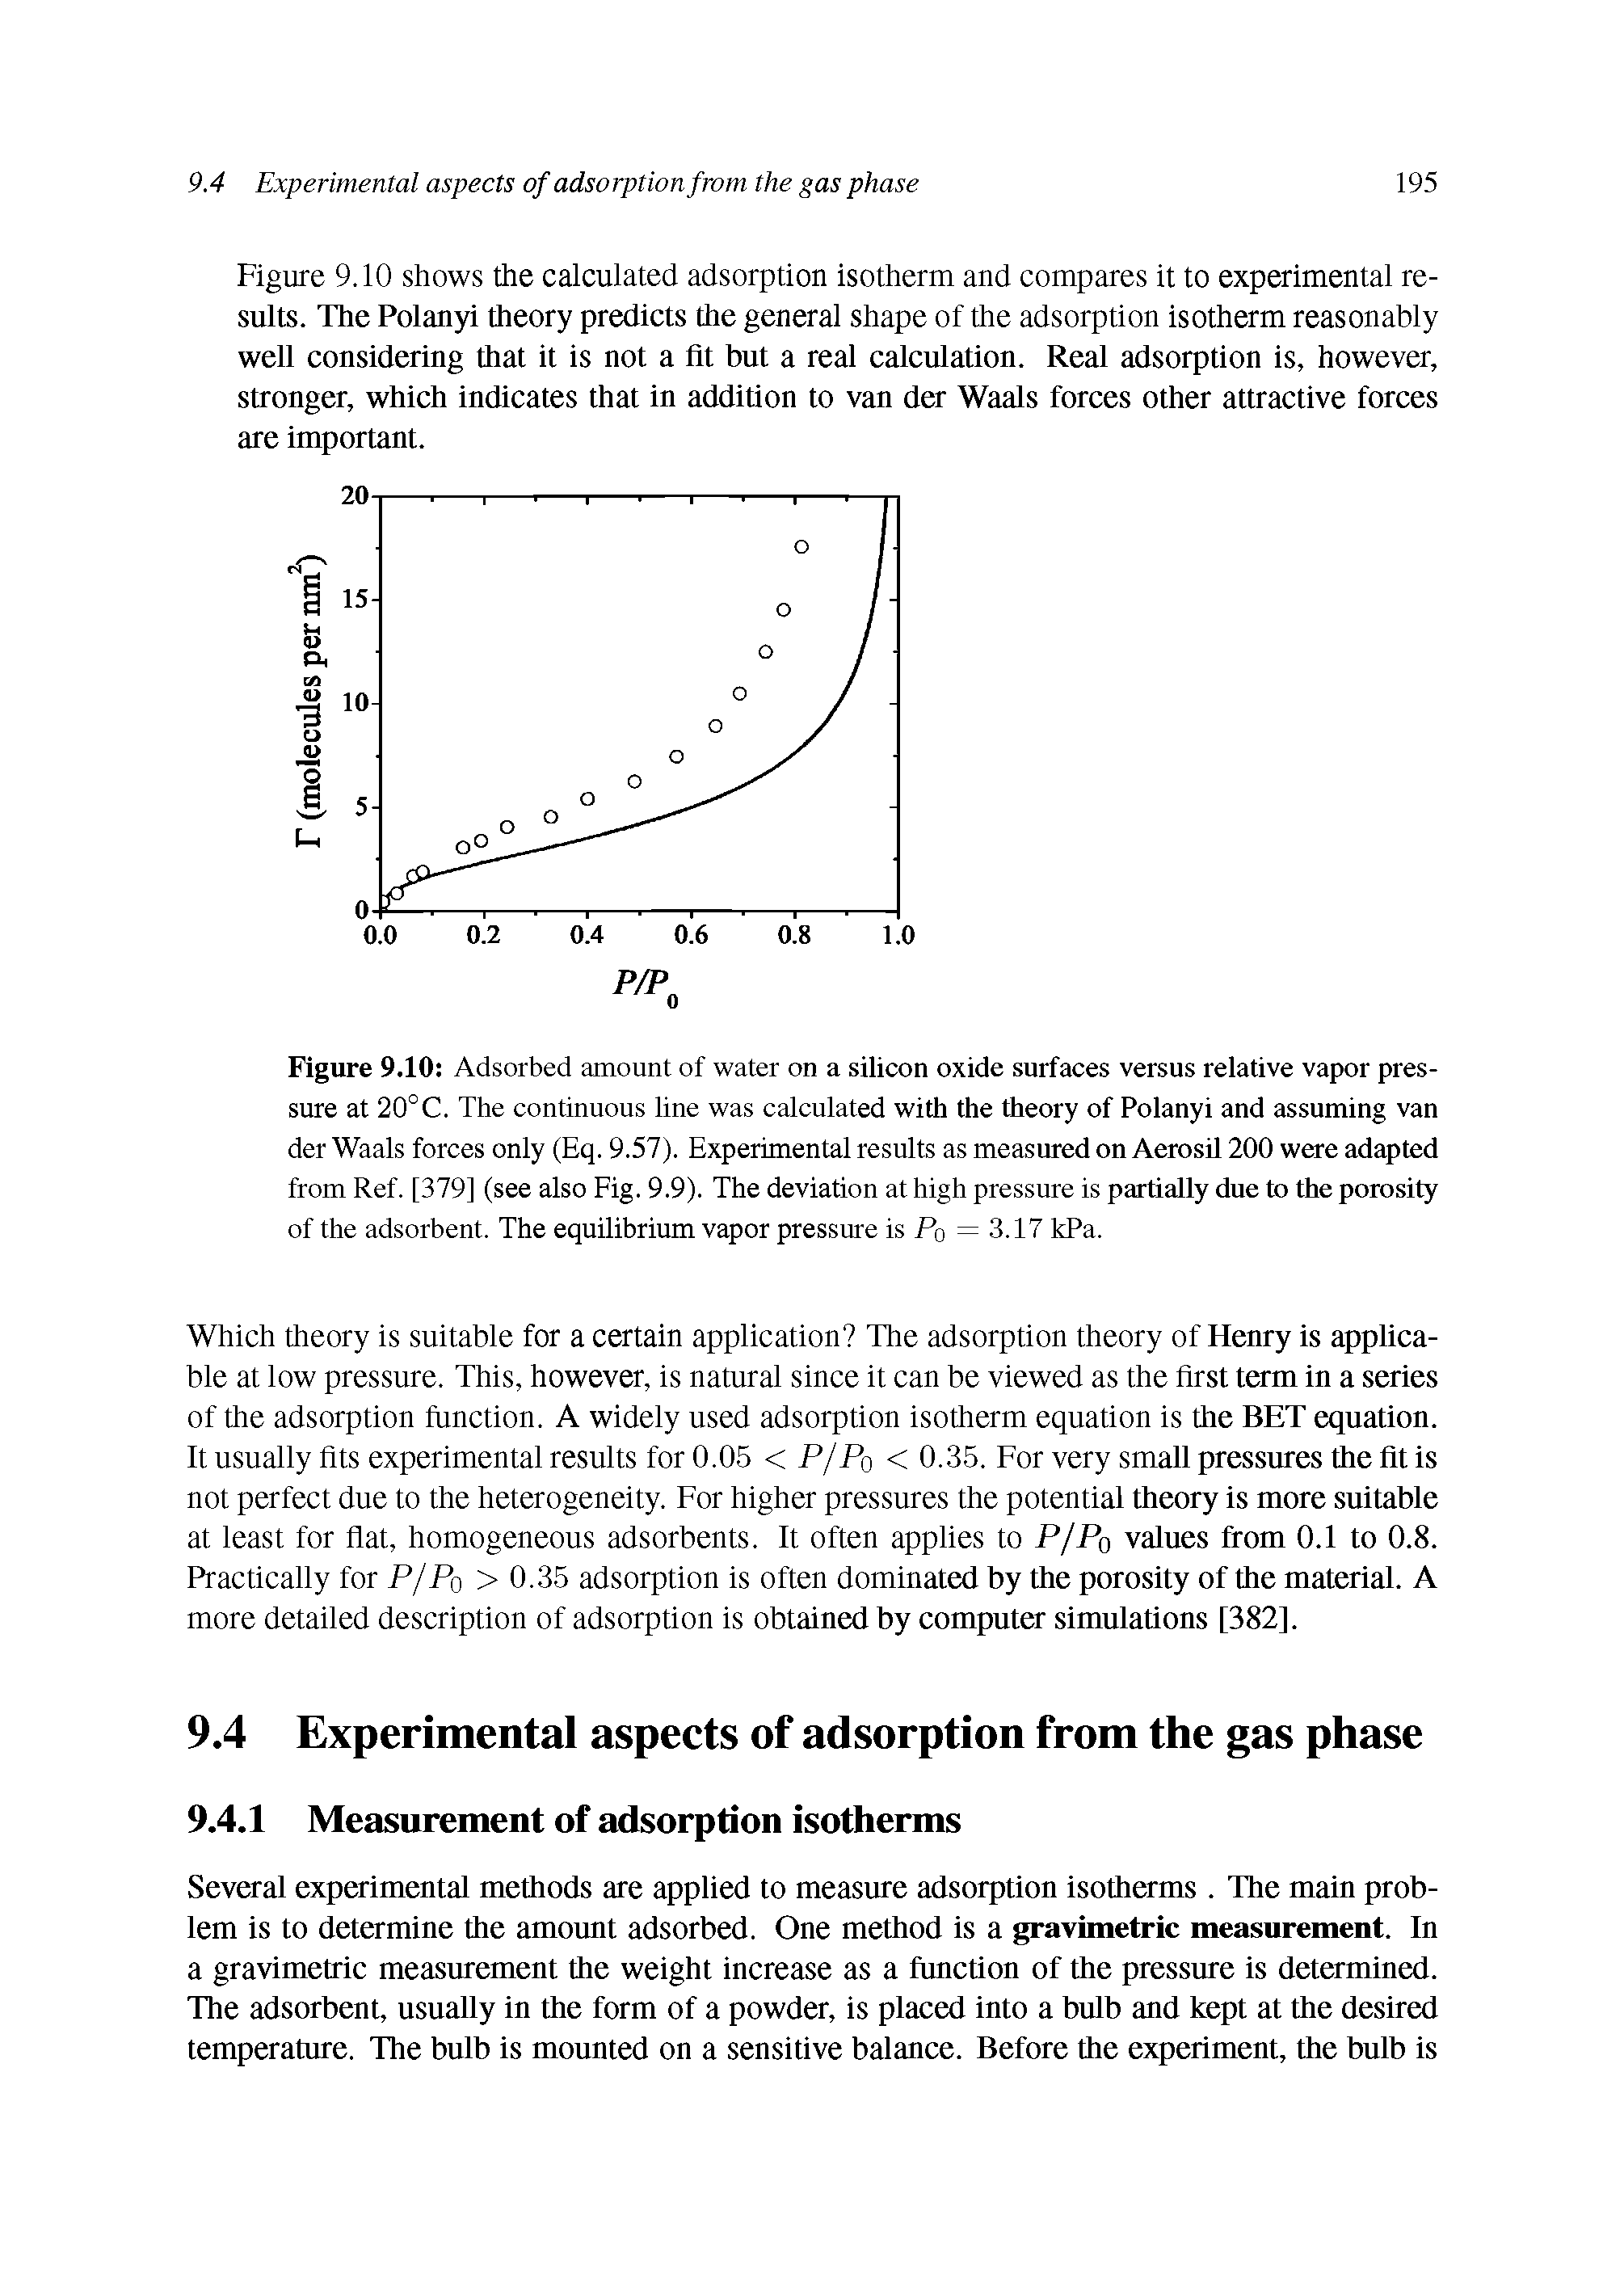 Figure 9.10 Adsorbed amount of water on a silicon oxide surfaces versus relative vapor pressure at 20°C. The continuous line was calculated with the theory of Polanyi and assuming van der Waals forces only (Eq. 9.57). Experimental results as measured on Aerosil 200 were adapted from Ref. [379] (see also Fig. 9.9). The deviation at high pressure is partially due to the porosity of the adsorbent. The equilibrium vapor pressure is P0 = 3.17 kPa.